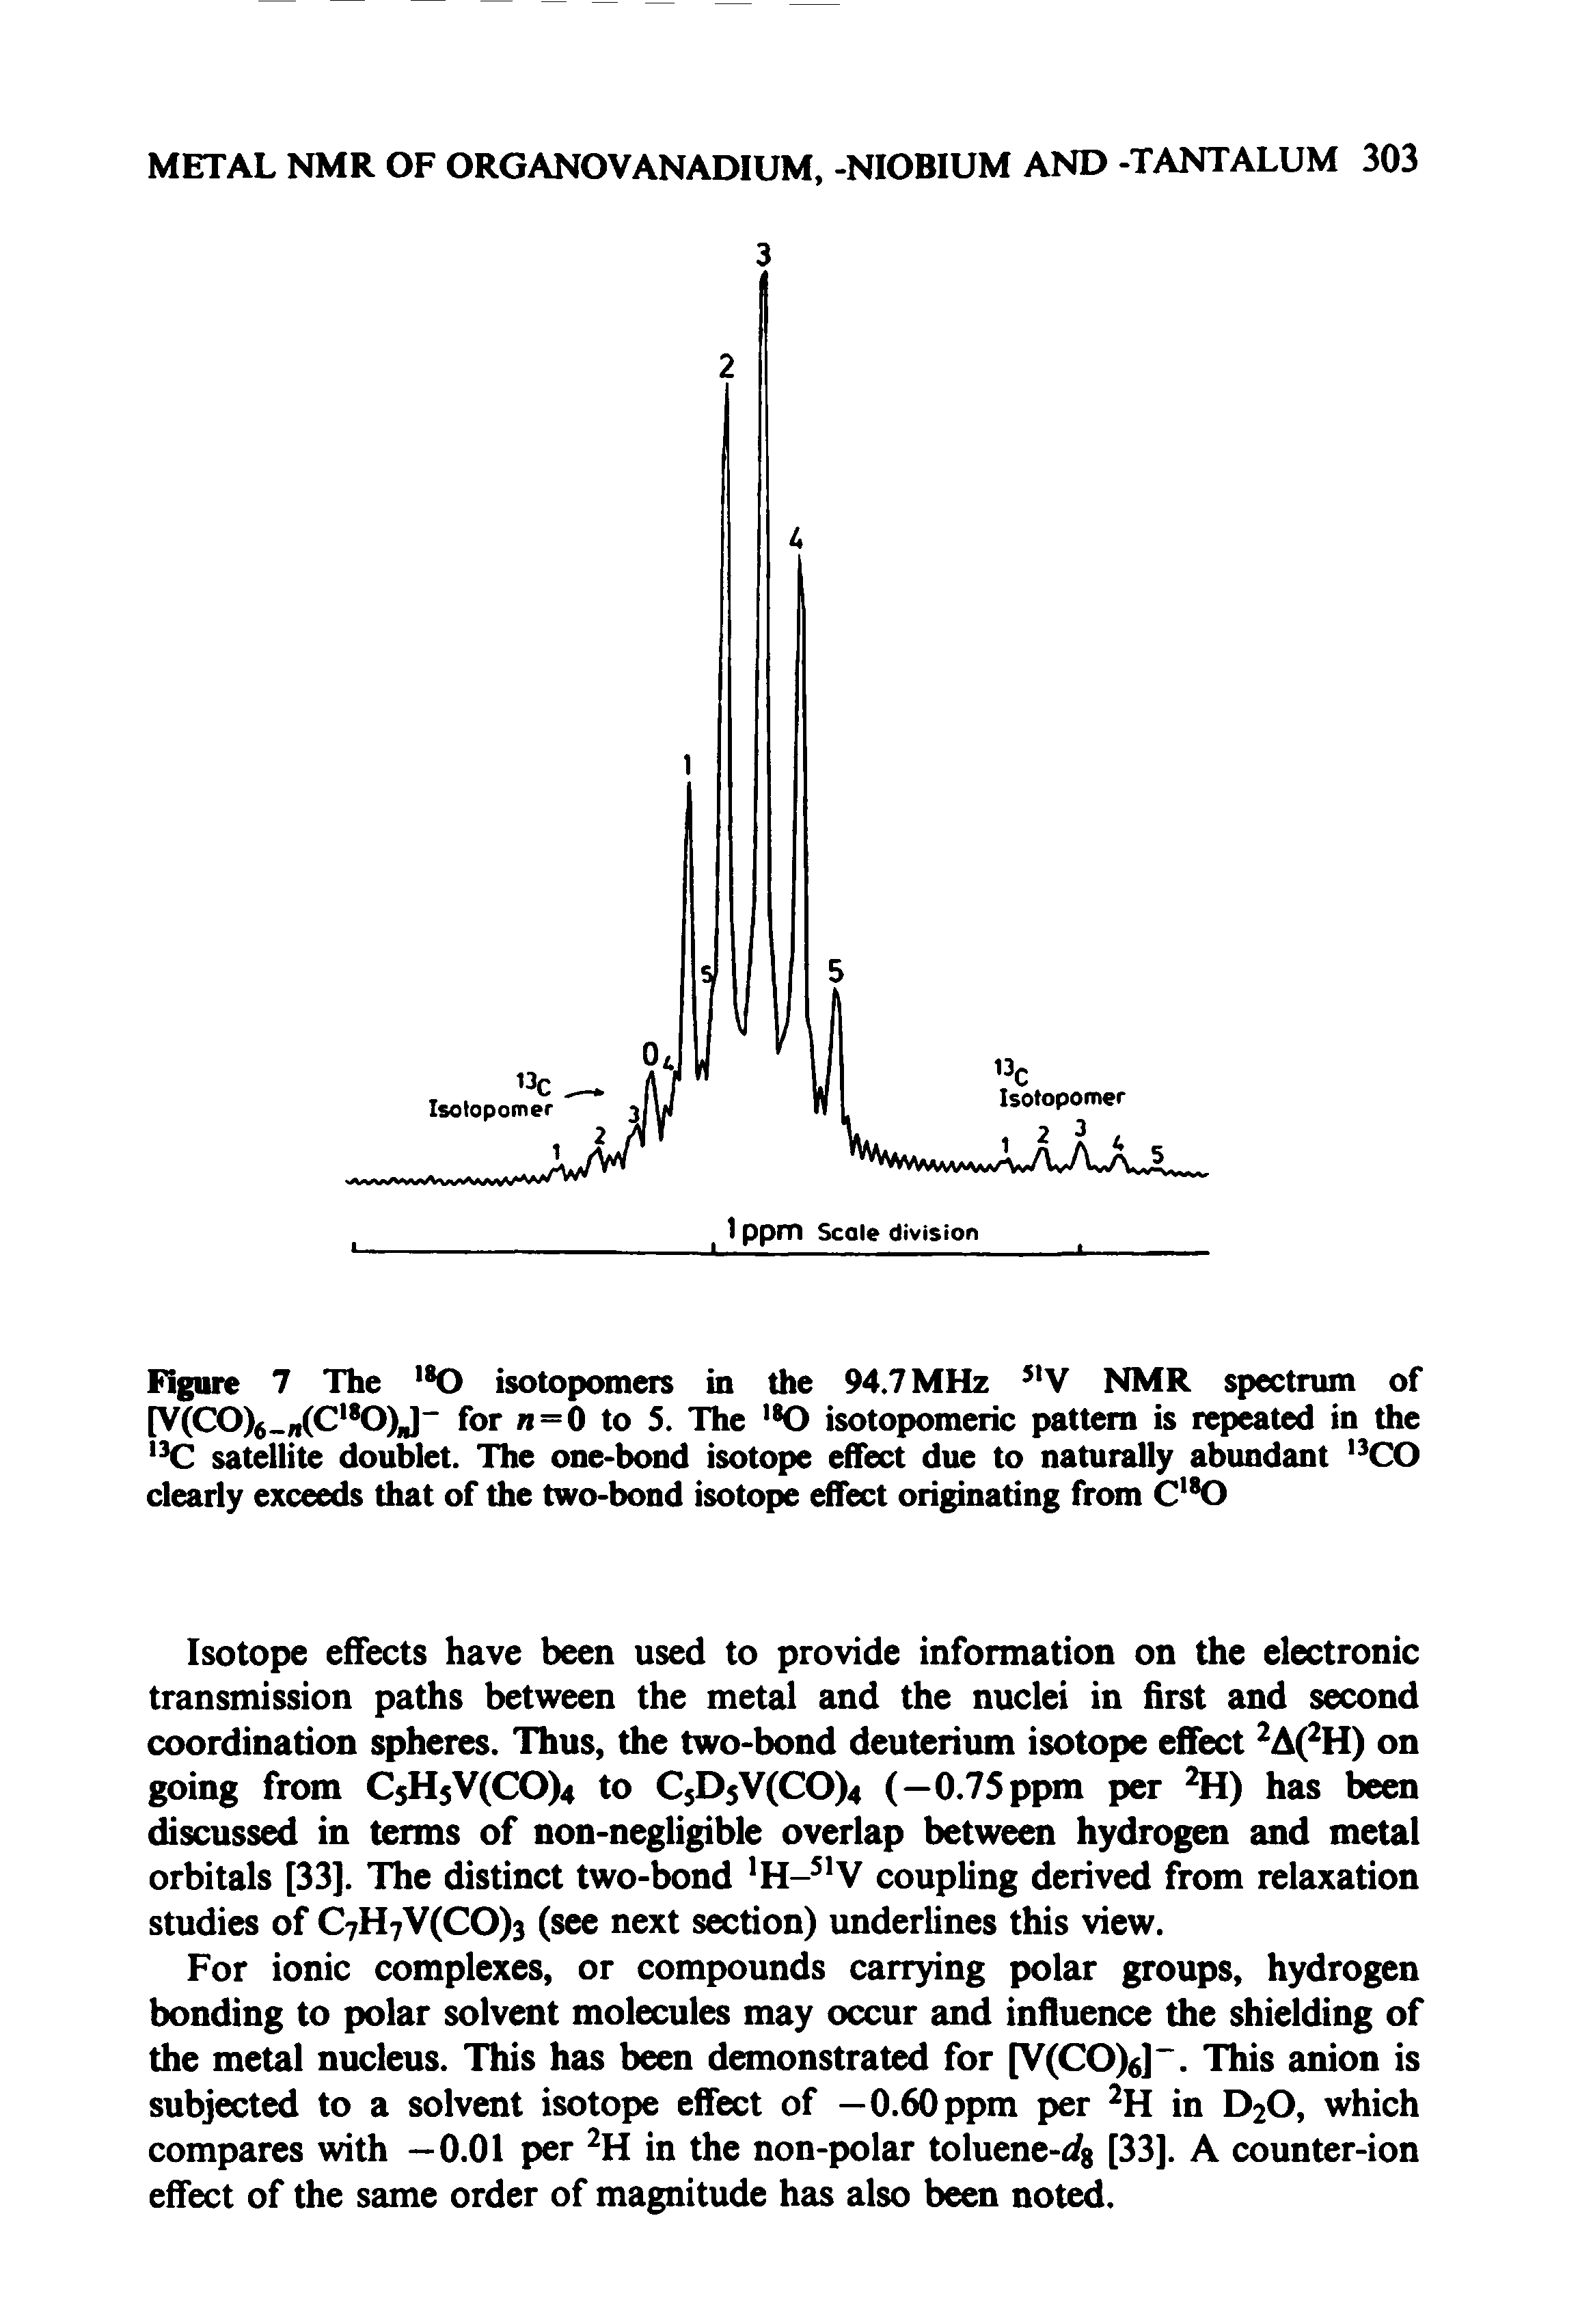 Figure 7 The 0 isotopomers in the 94.7 MHz NMR spectrum of [V(C0)j n(C 0)J" for n = 0 to 5. The 0 isotopomeric pattern is repeated in the satellite doublet. The one-bond isotope effect due to naturally abundant CO clearly exceeds that of the two-bond isotope effect originating from...